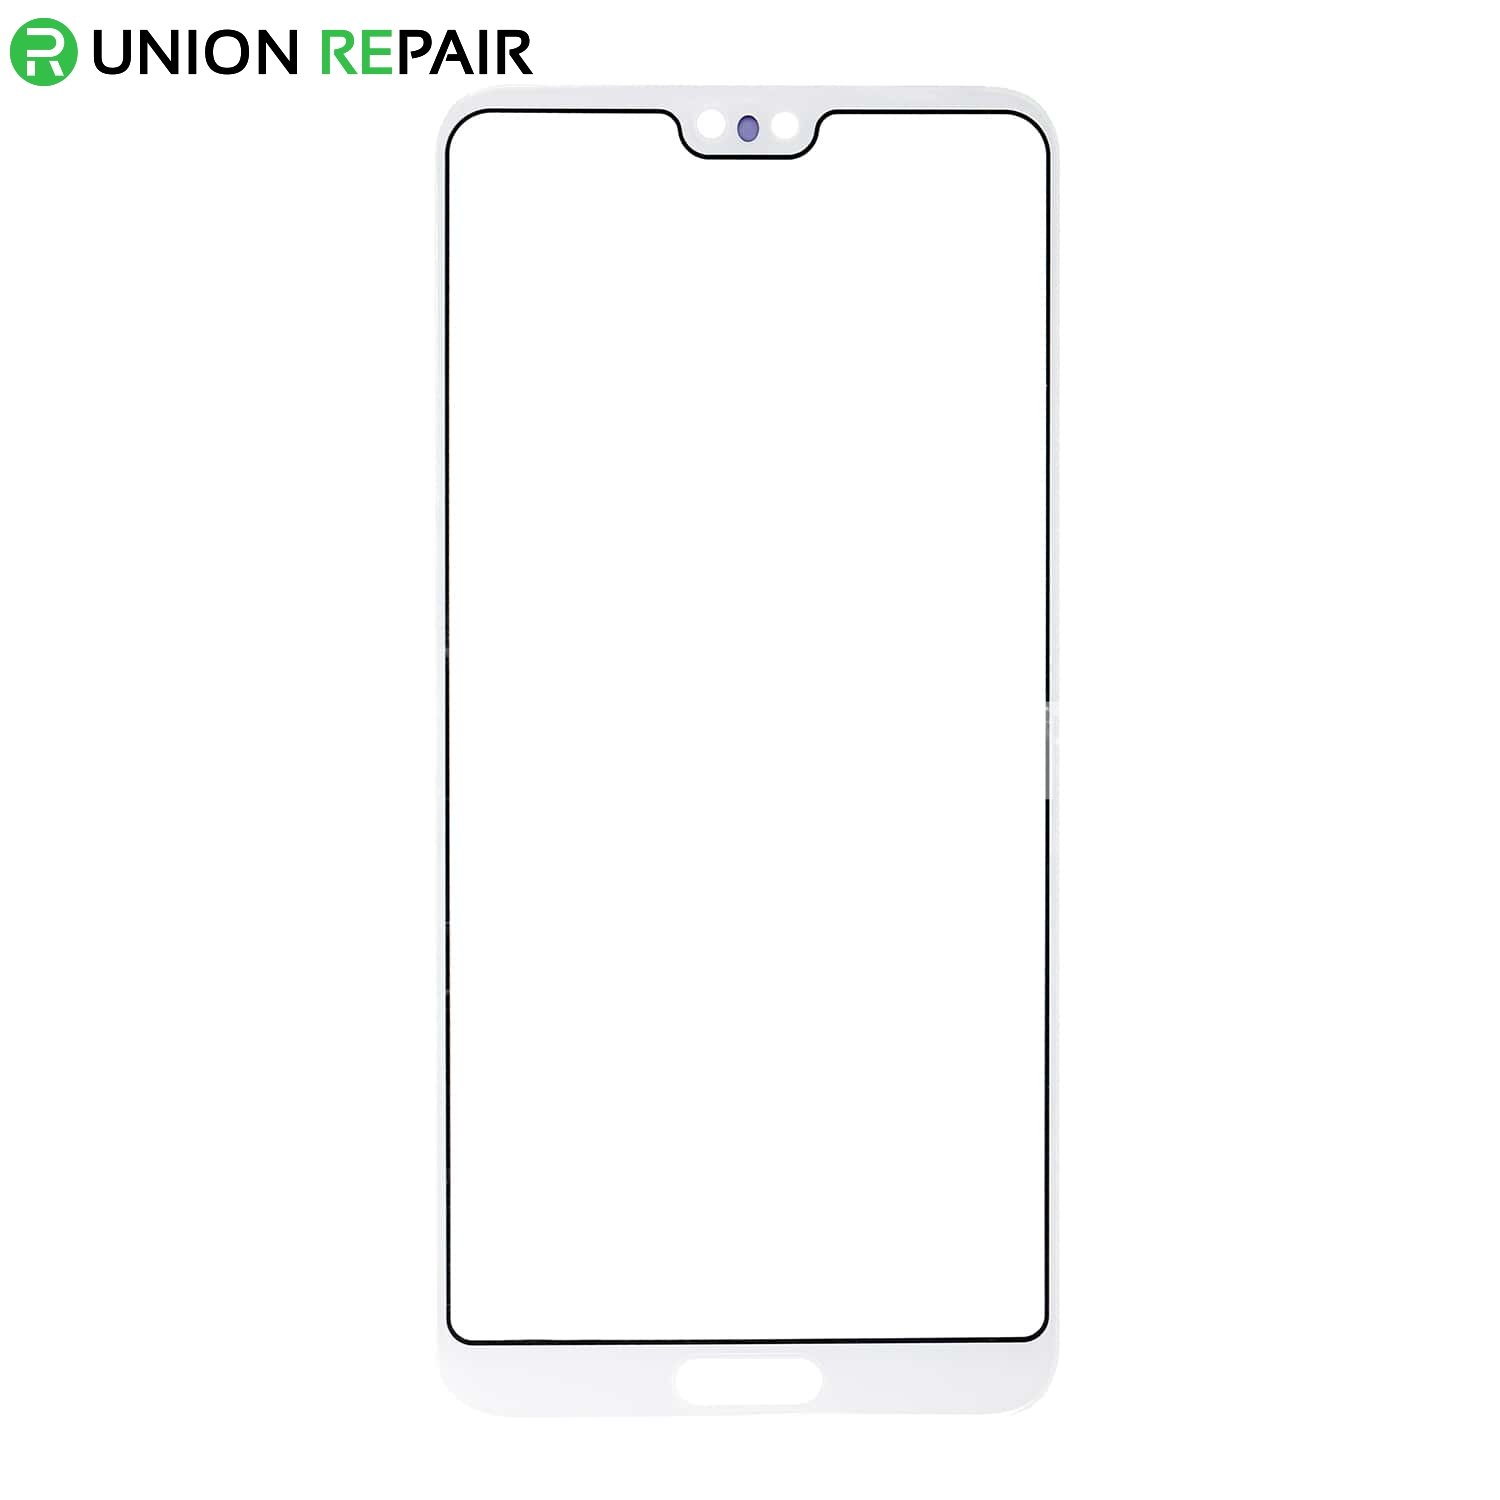 Rute rent faktisk Døde i verden Replacement for Huawei P20 Pro Front Glass Lens - White